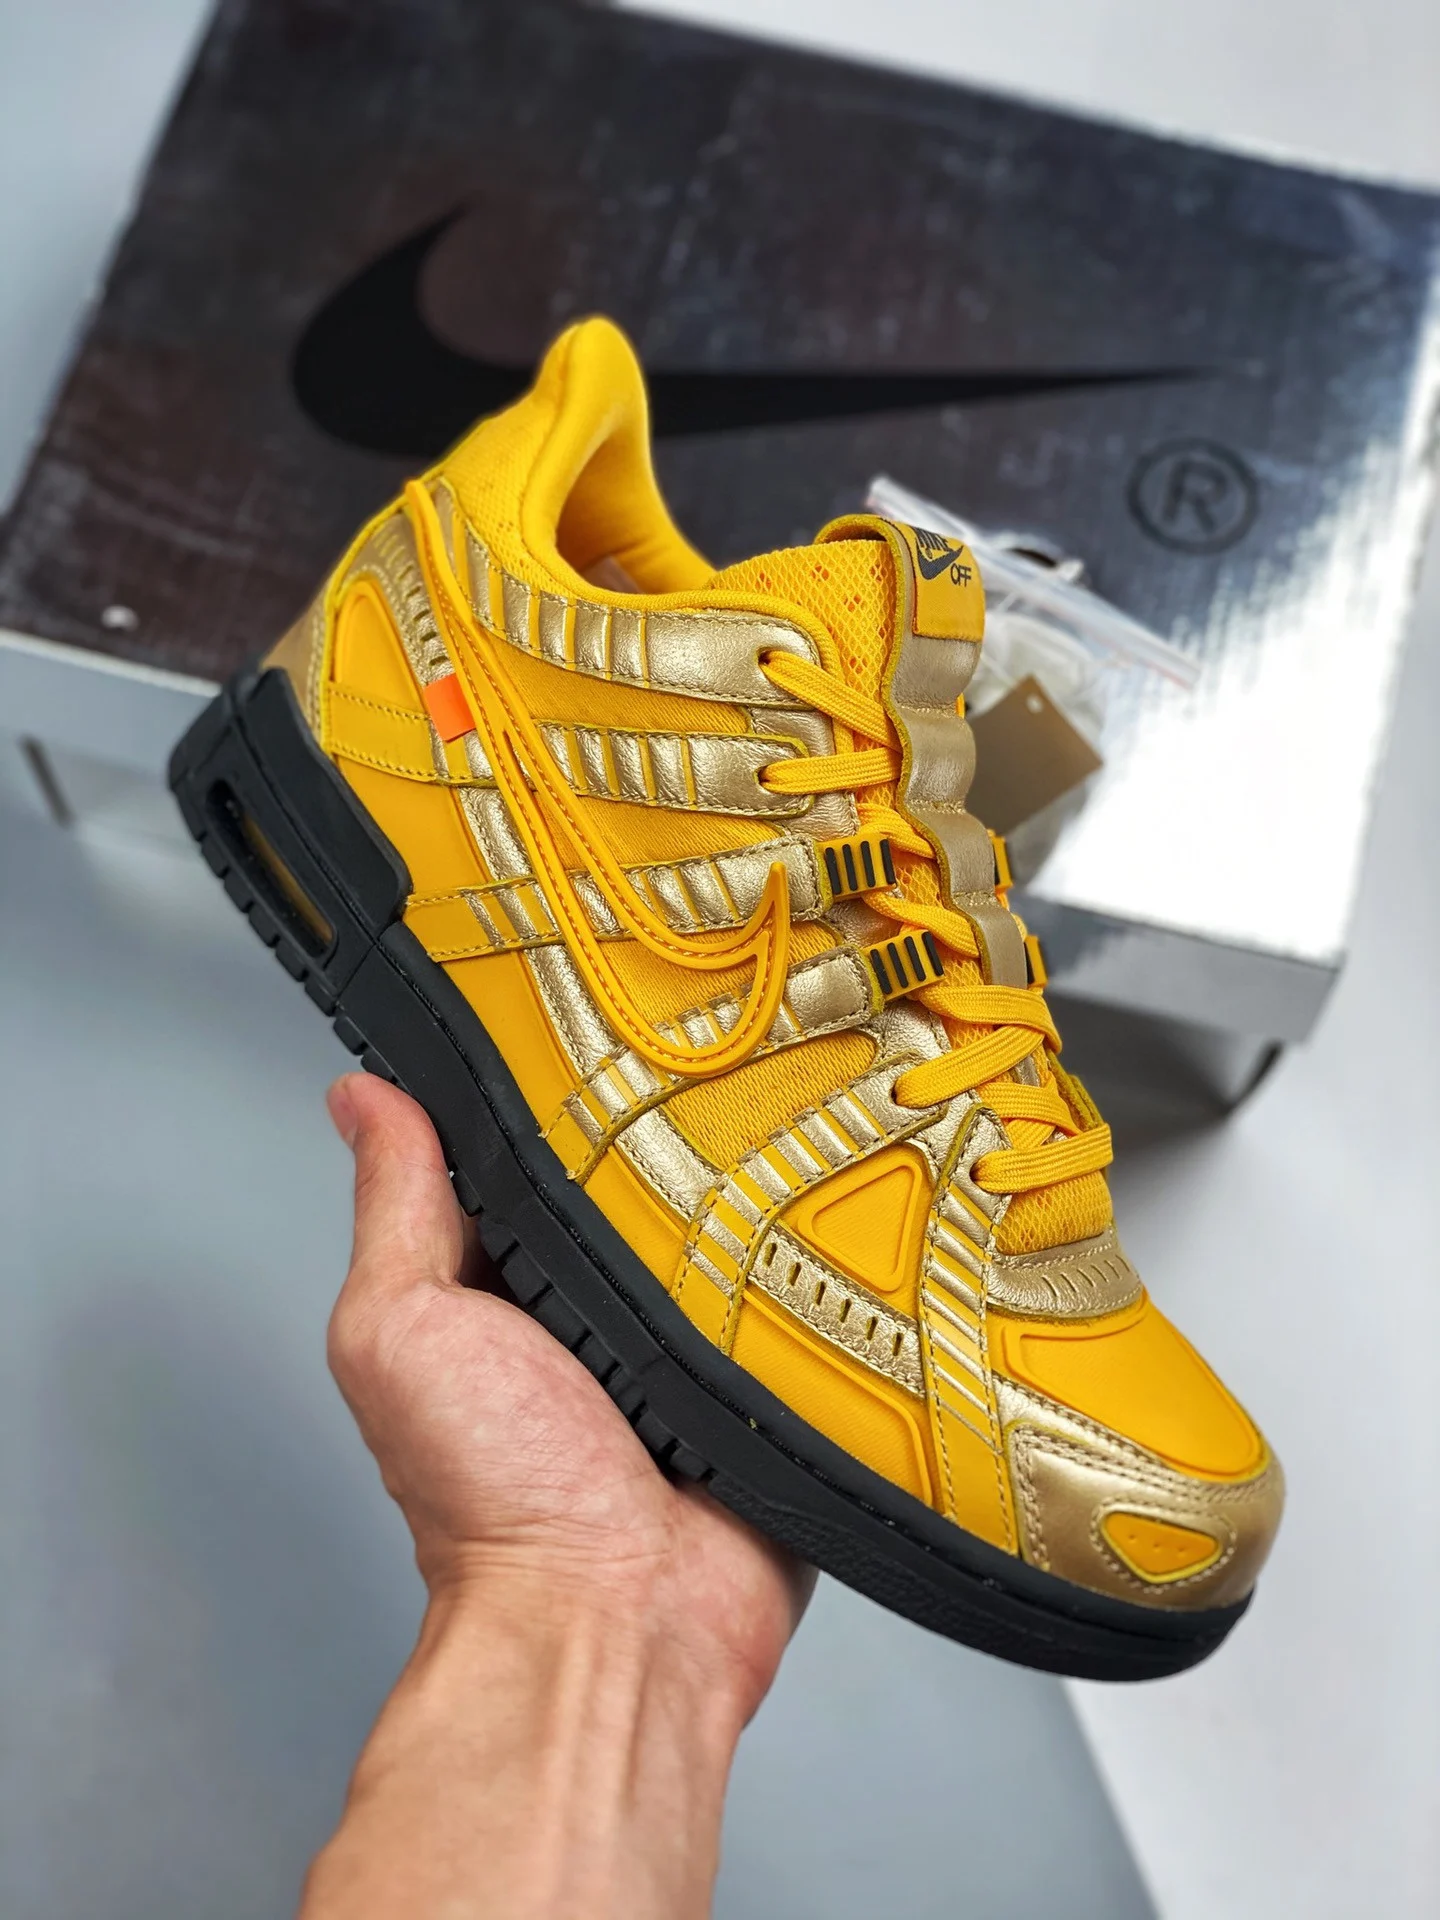 Off-White x Nike Air Rubber Dunk University Gold CU6015-700 For Sale